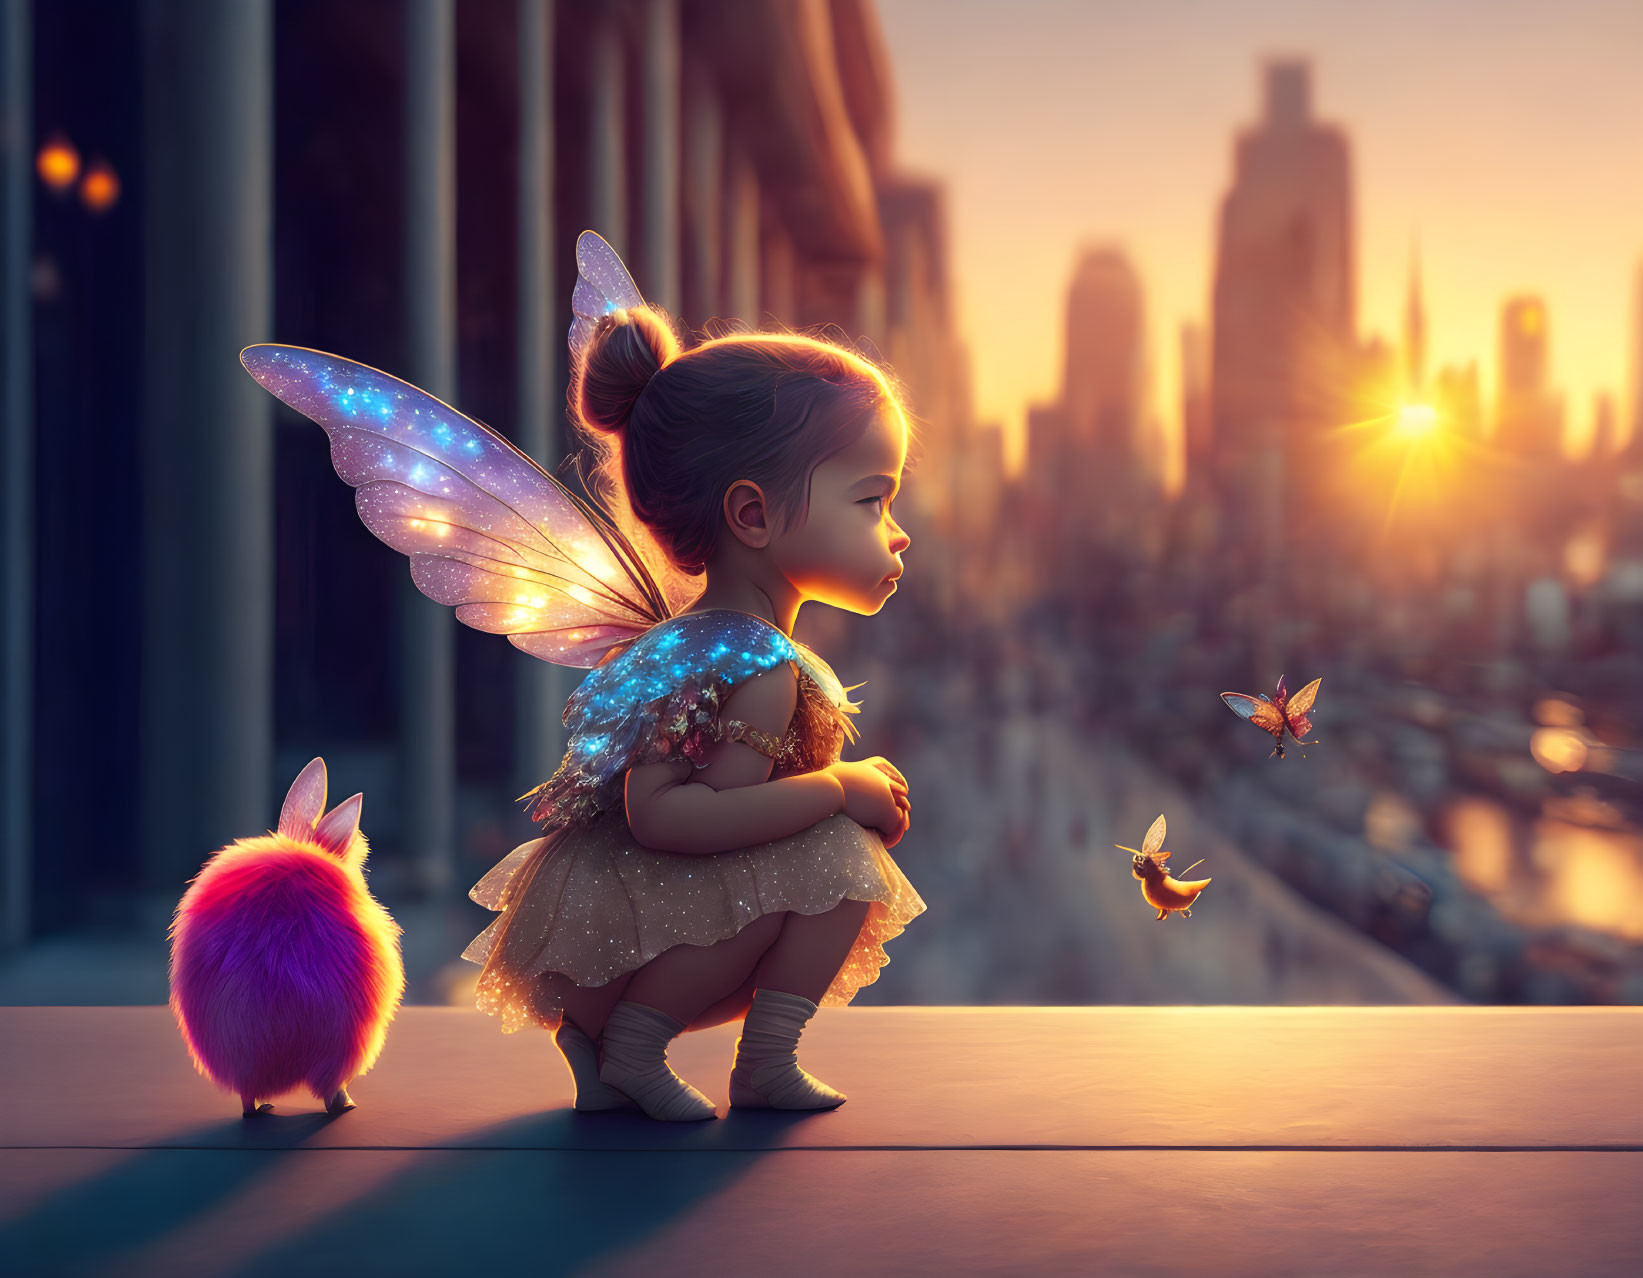 Child with fairy wings and fluffy creature watching cityscape sunset and butterflies